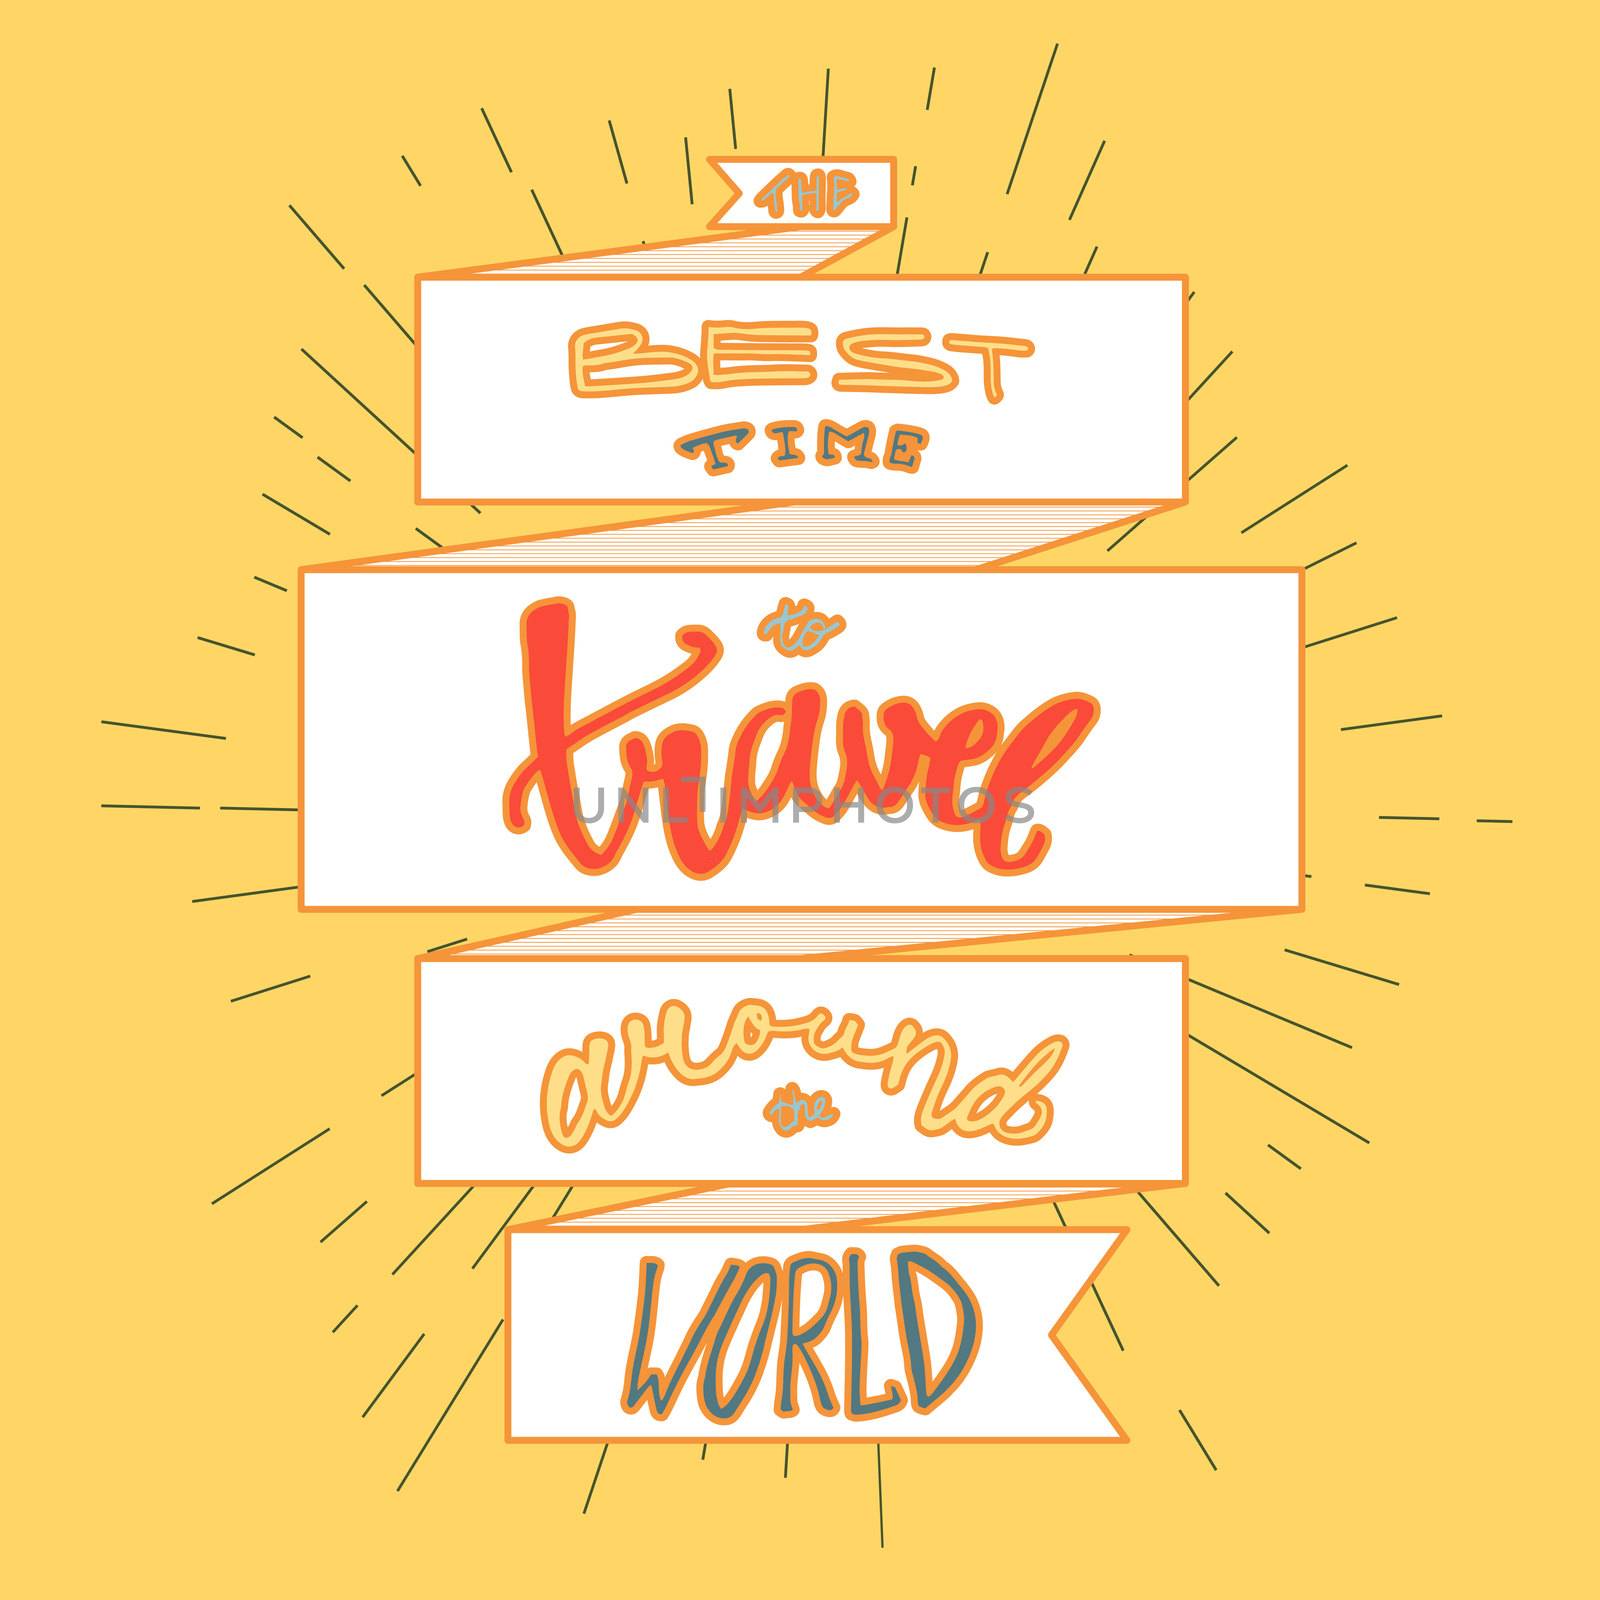 Inspirational retro lettering in ribbon for print, t-shirt, poster, tourism and travel emblems, logo. Vintage motivational poster design element. The best time to travel around the world. Vector